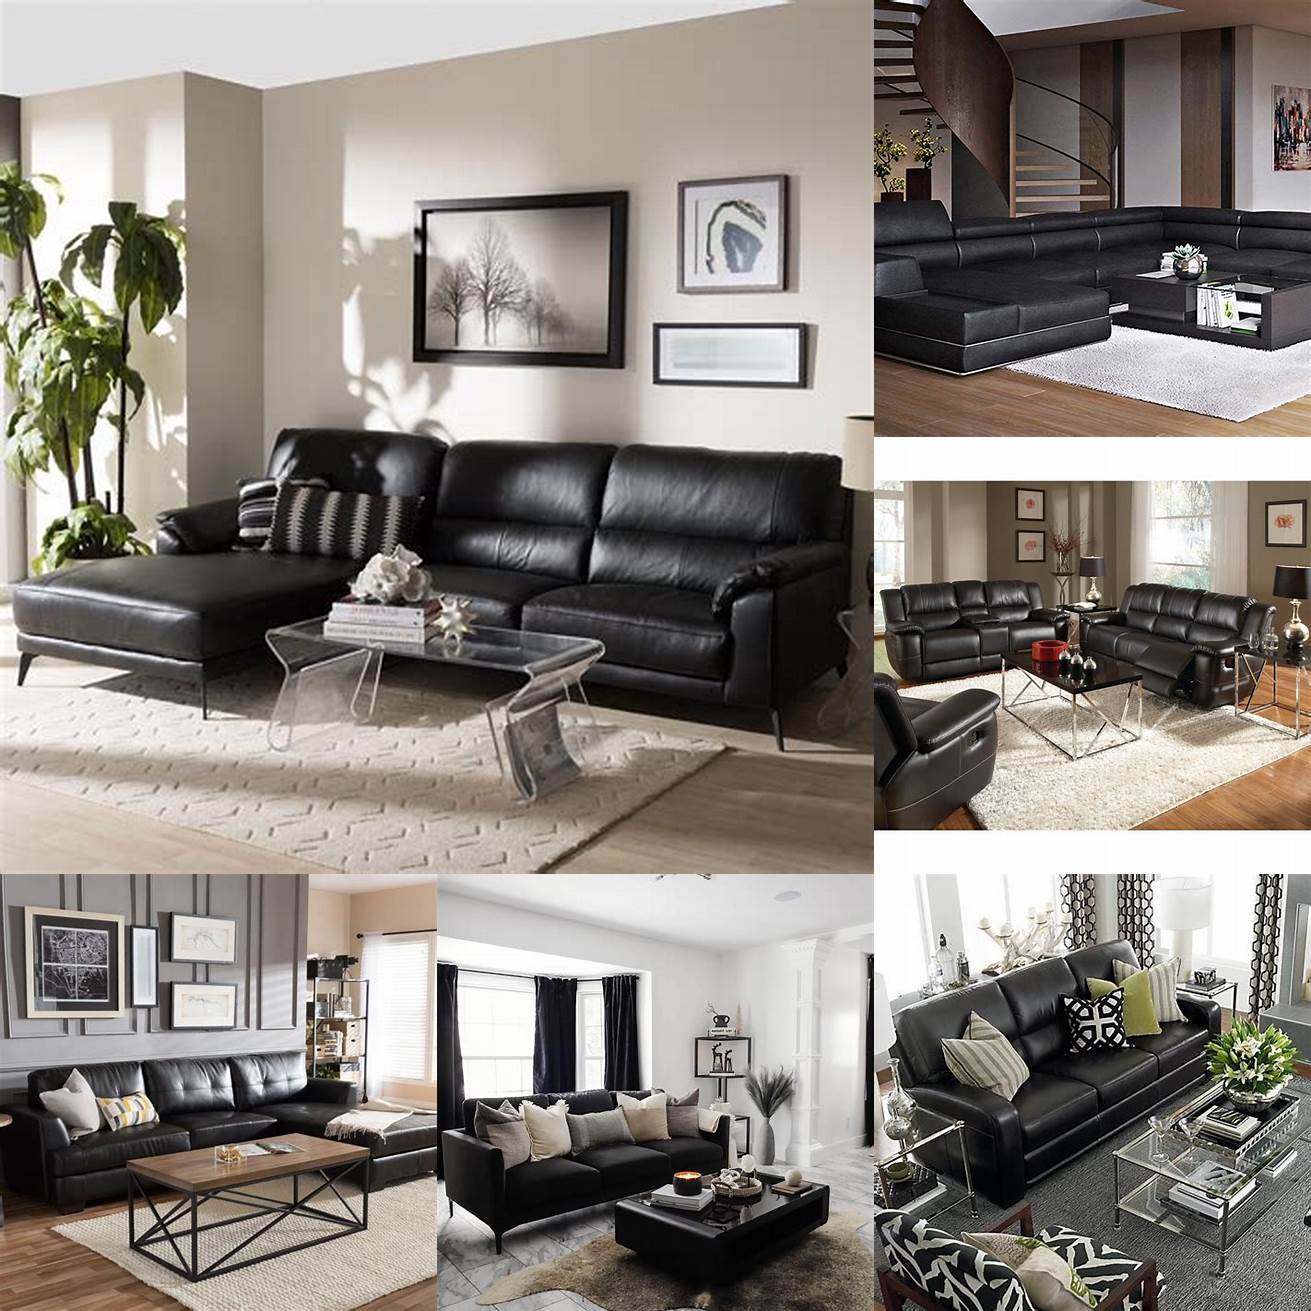 Image Idea 4 A modern living room with a black leather sofa with chaise